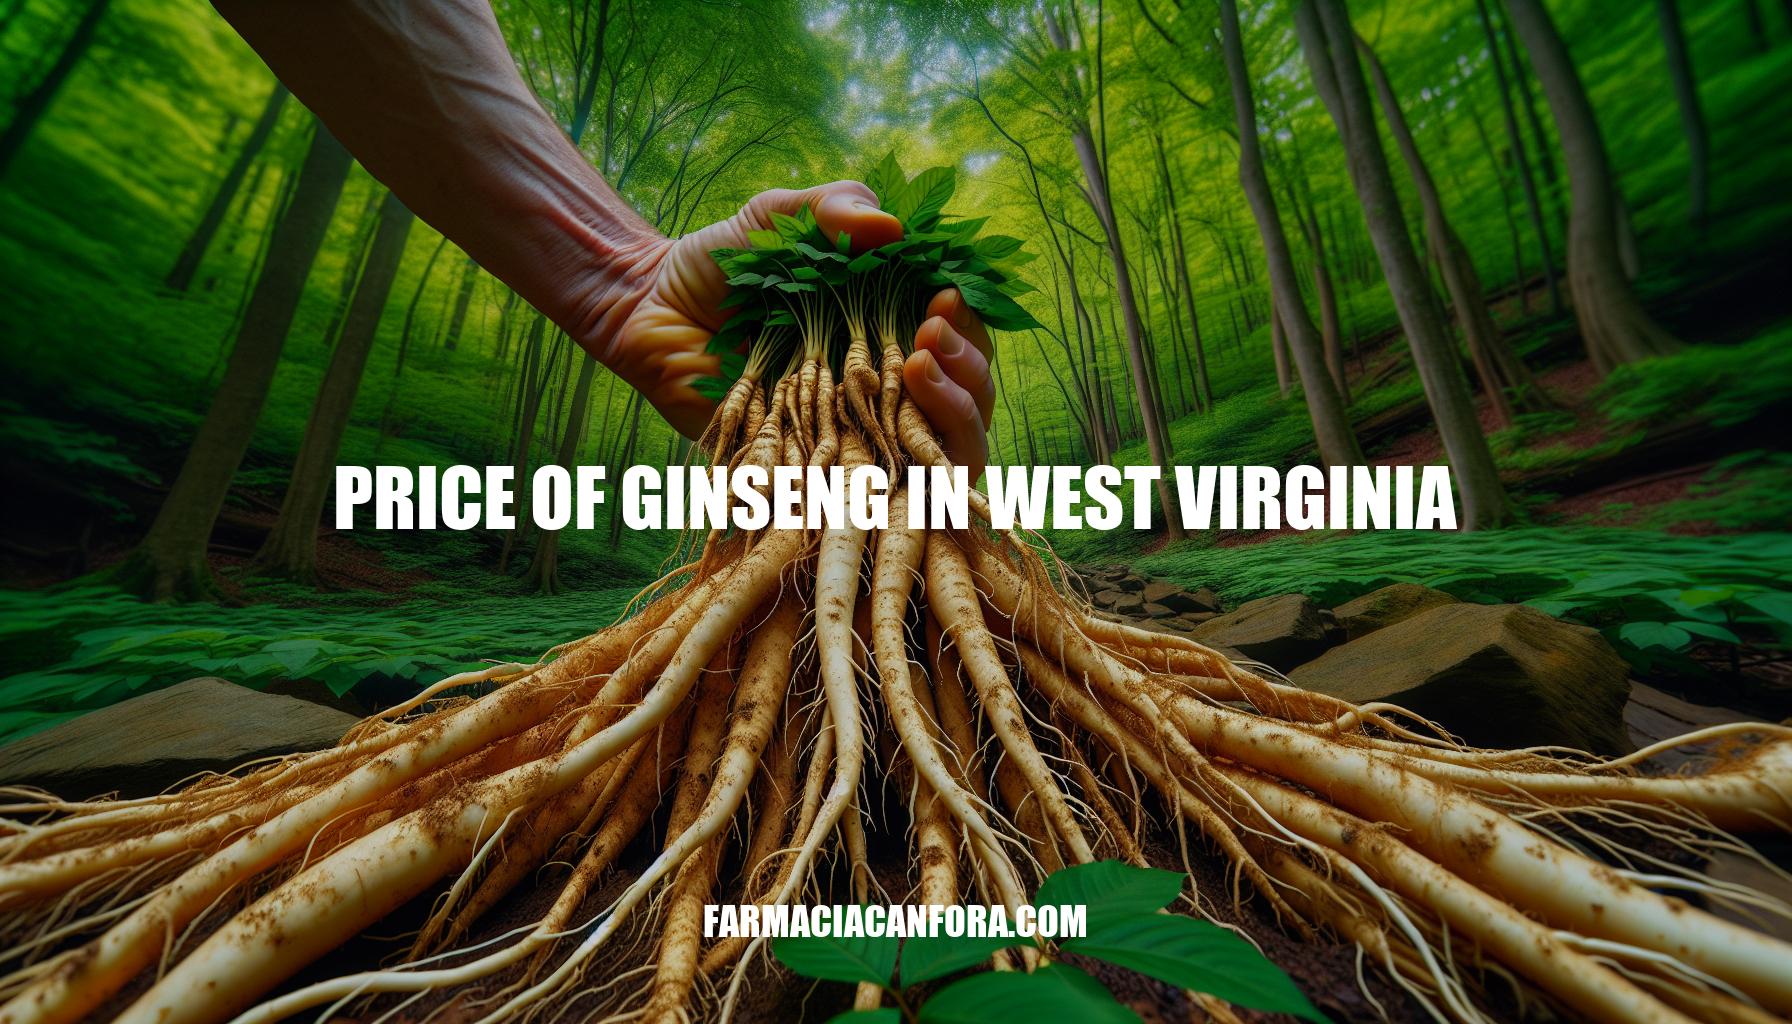 Guide to the Price of Ginseng in West Virginia